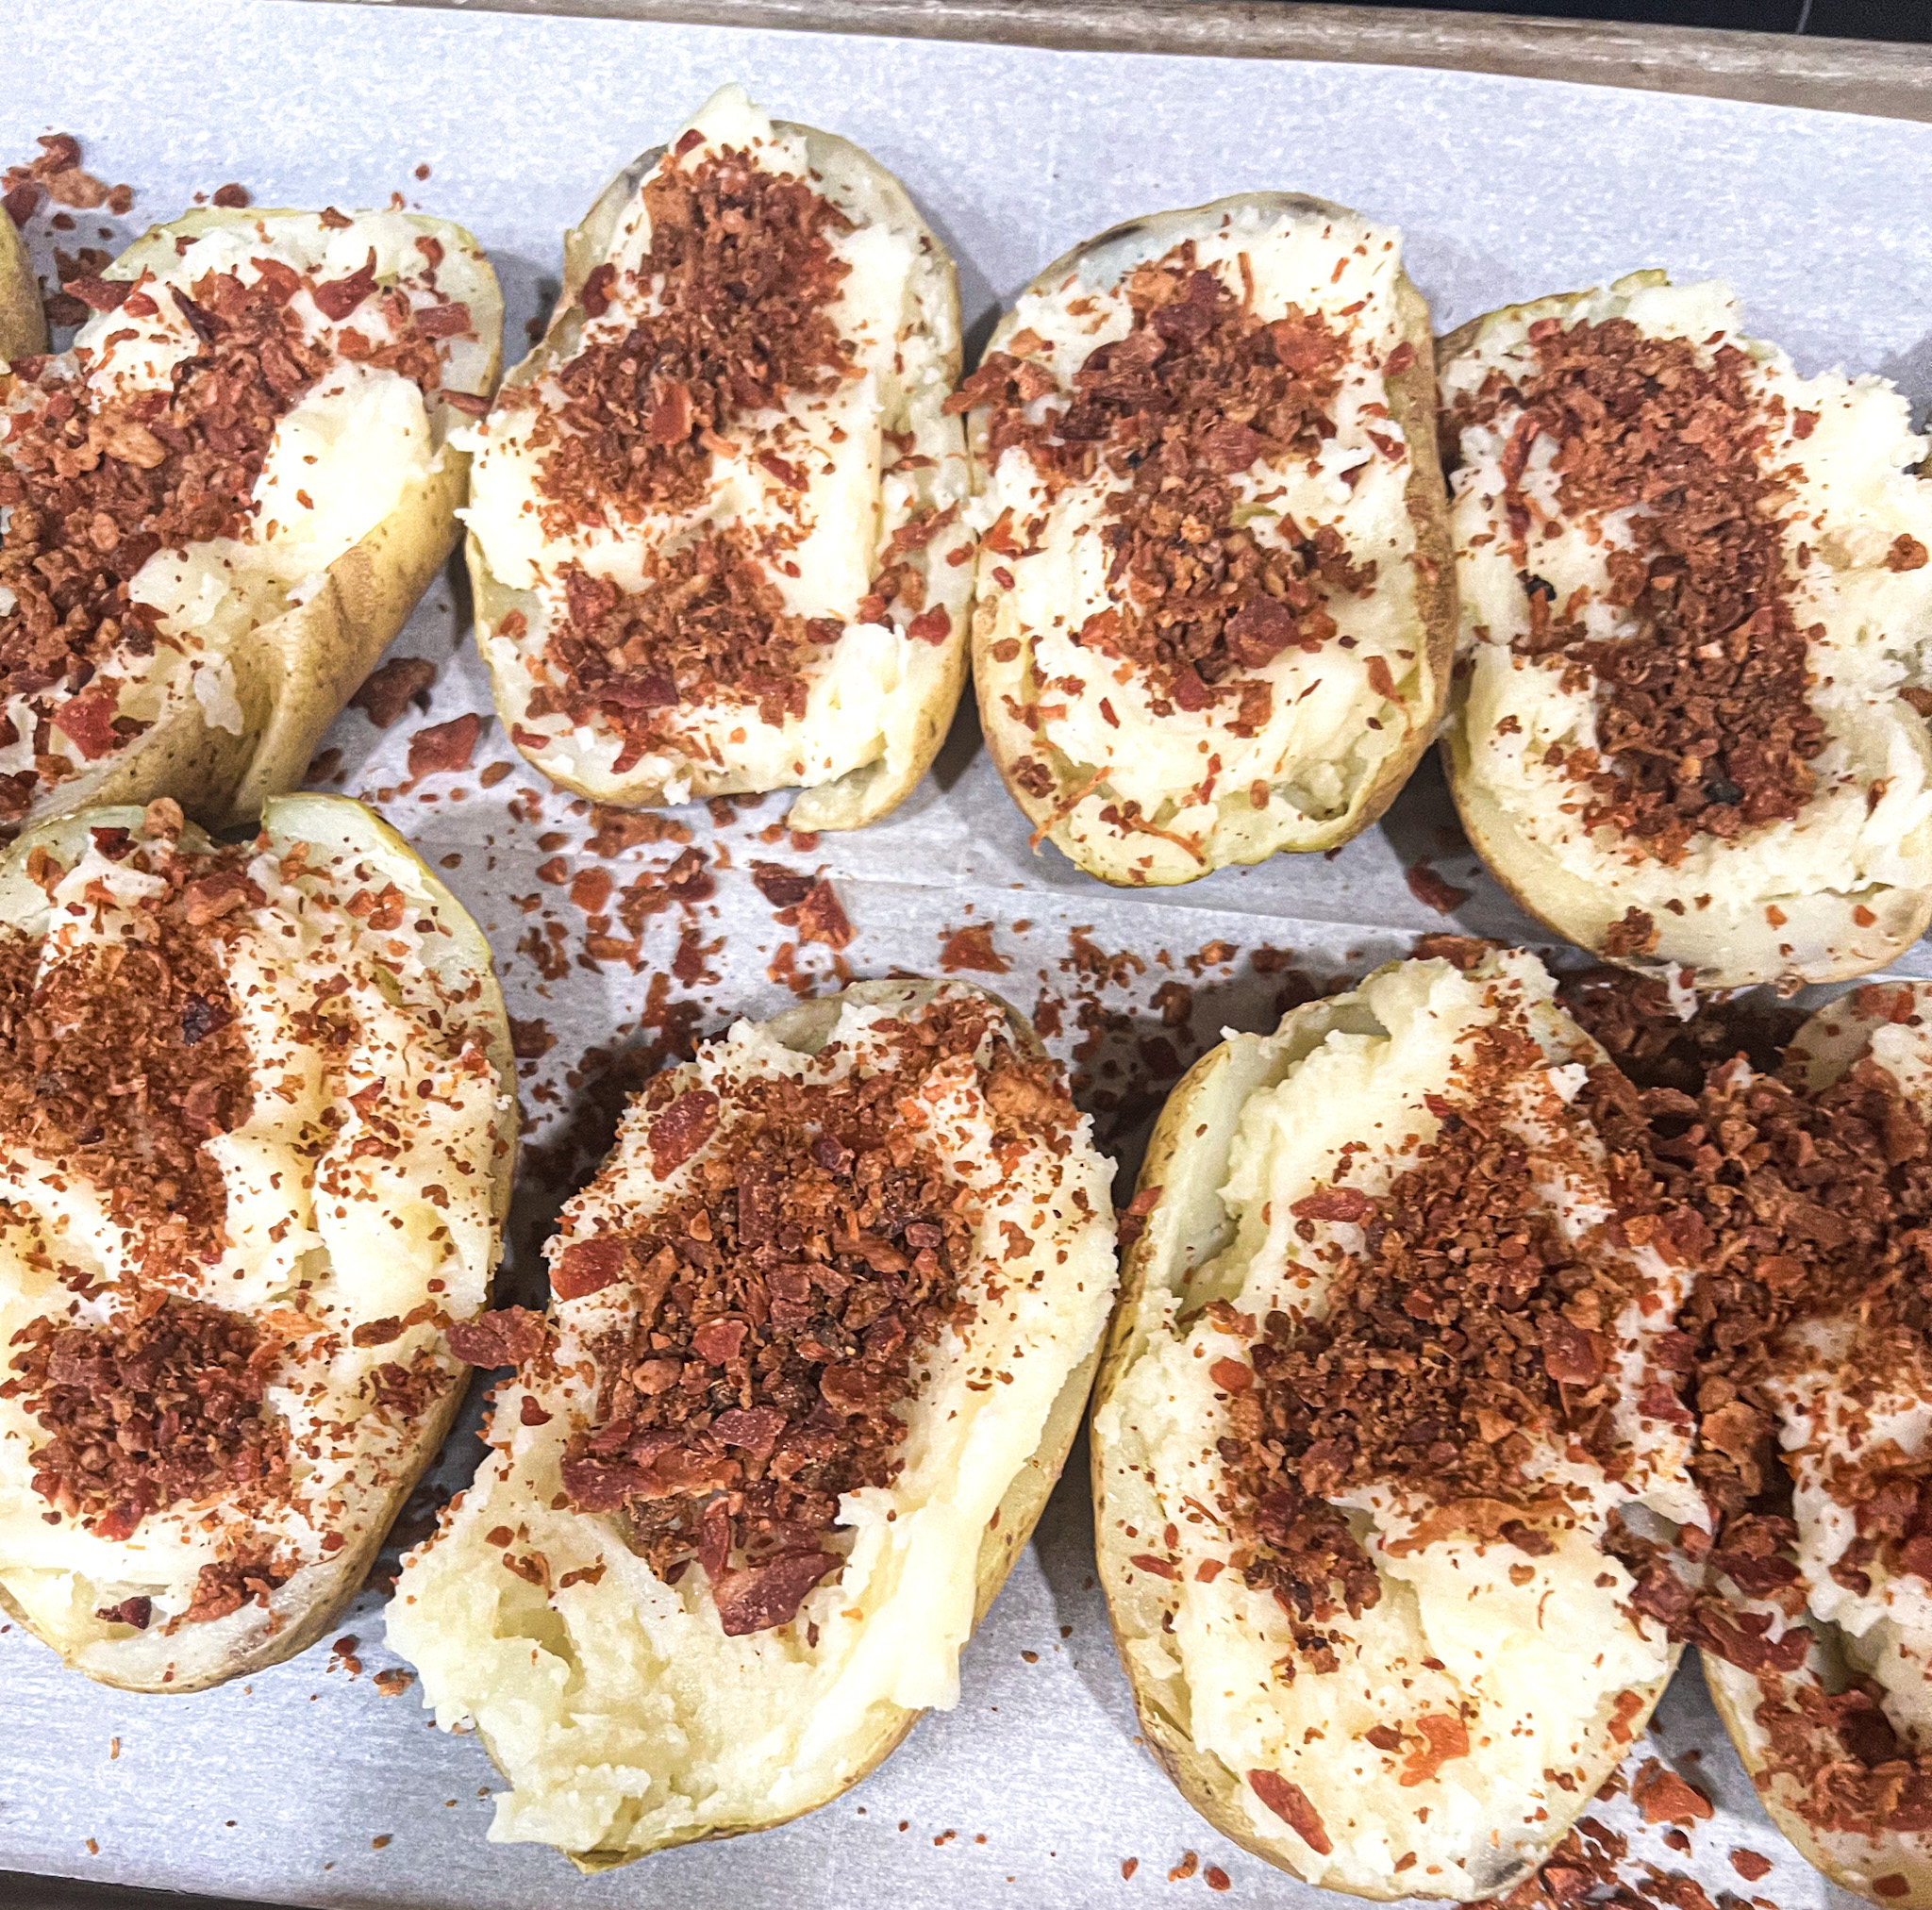 bacon being added on twice baked potatoes